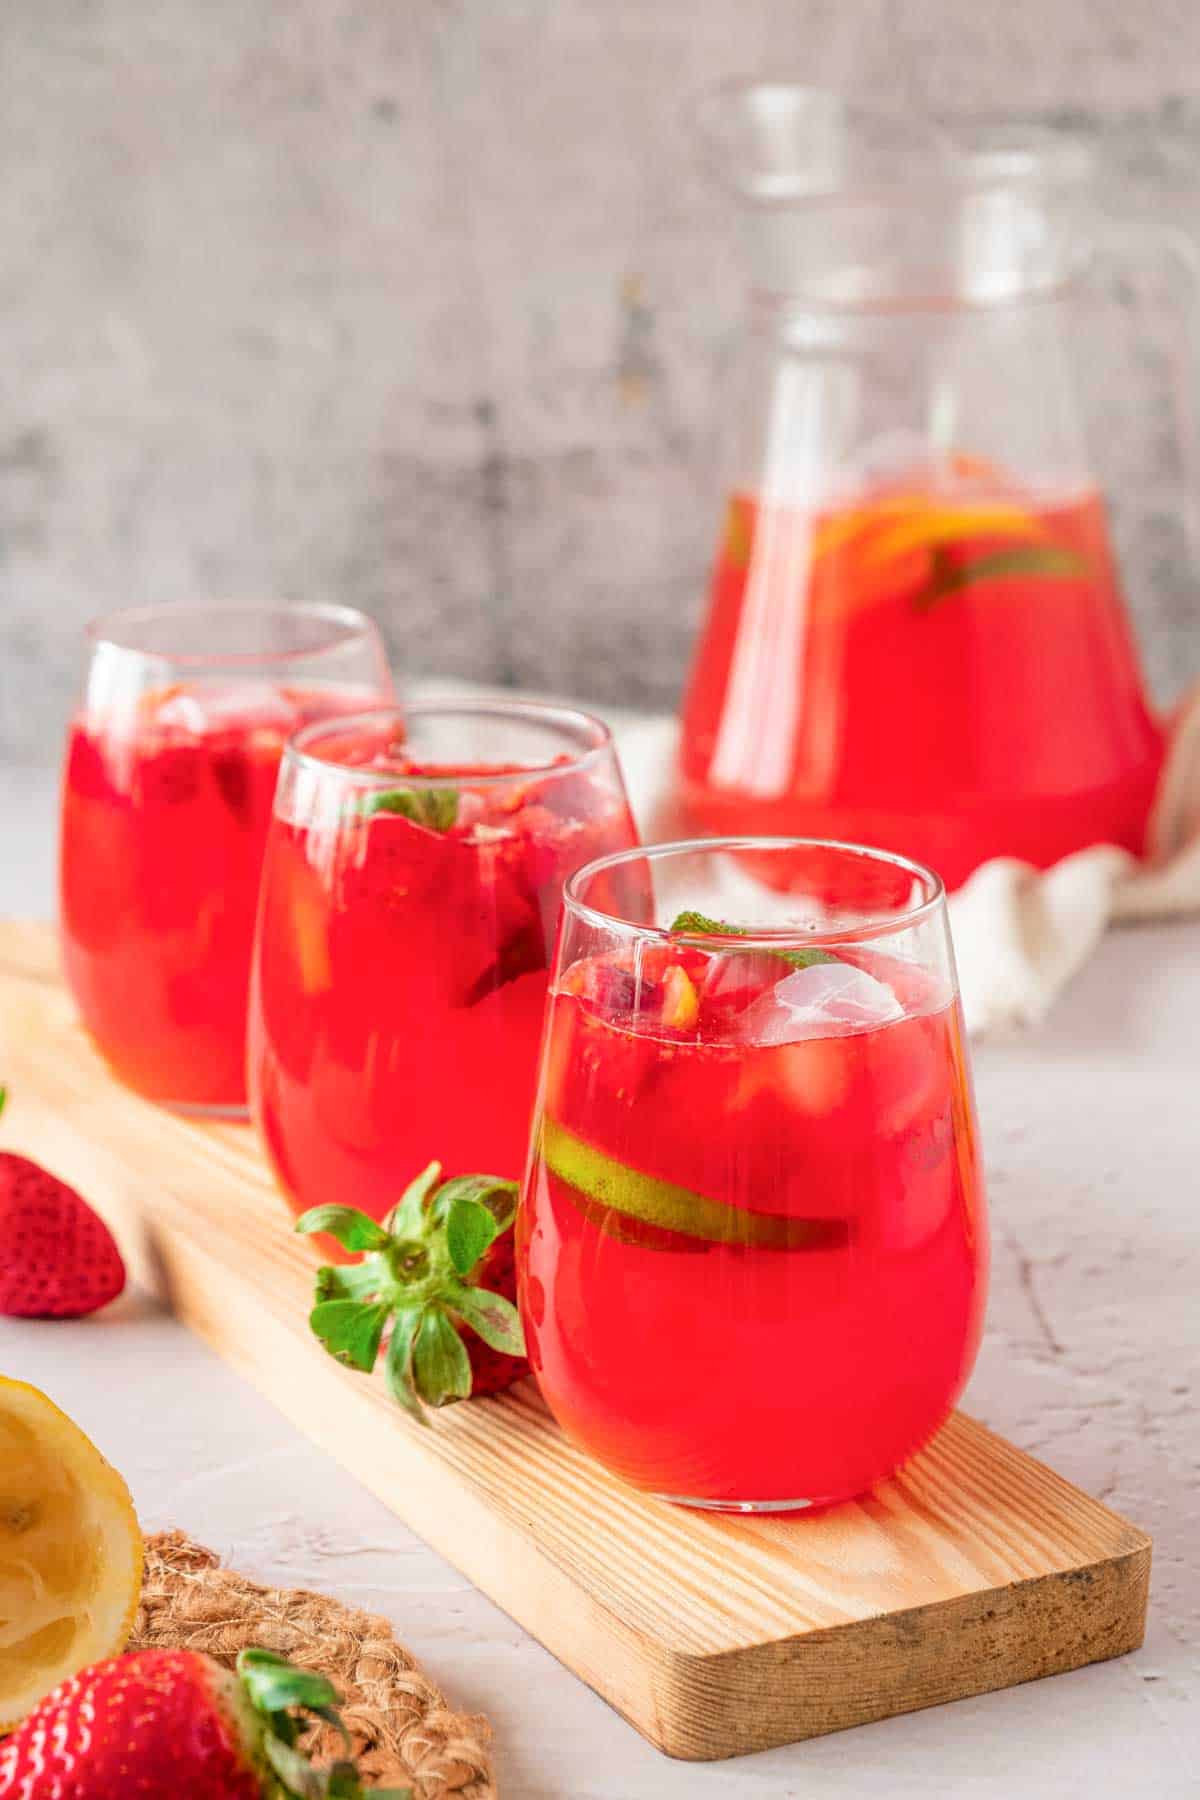 A pitcher and glasses of strawberry mint lemonade.